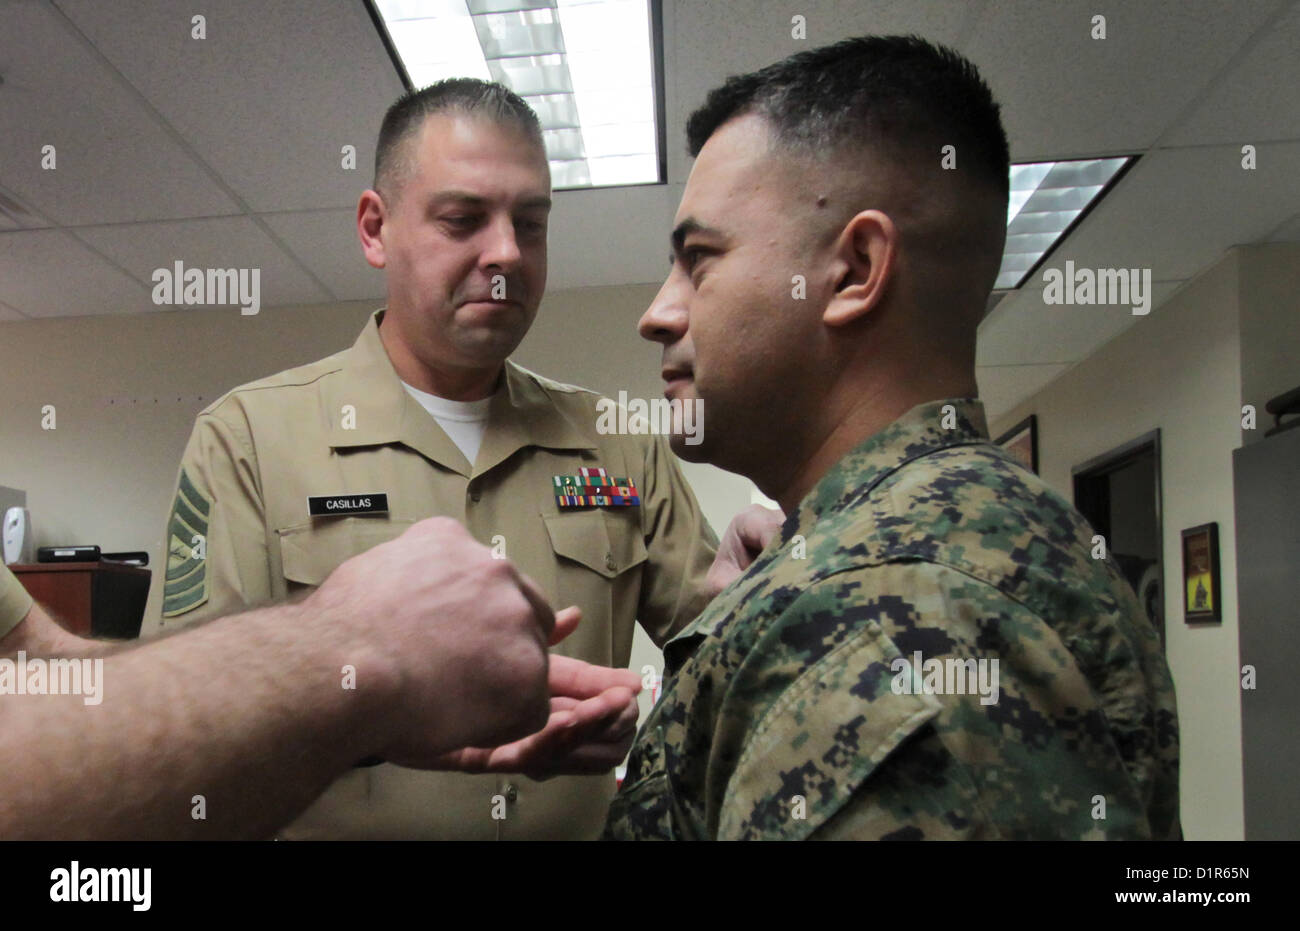 Gunnery Sgt. Roque Palmerinvega, right, receives new gunnery sergeant chevrons on his collar upon being promoted from staff sergeant to gunnery sergeant during a ceremony at the Marine Corps Recruiting Station Phoenix Headquarters in Phoenix, Jan. 2, 2013. Palmerinvega, a native of Myton, Utah, and a light armored vehicle crewman by trade, has been a recruiter in the Phoenix region since April, 2010. 'It's a big deal and a requires a much broader sense of leadership,' Maj. Steven M. Ford, commanding officer of R.S. Phoenix, said of Palmerinvega's promotion. 'It's a quintessential rank within t Stock Photo